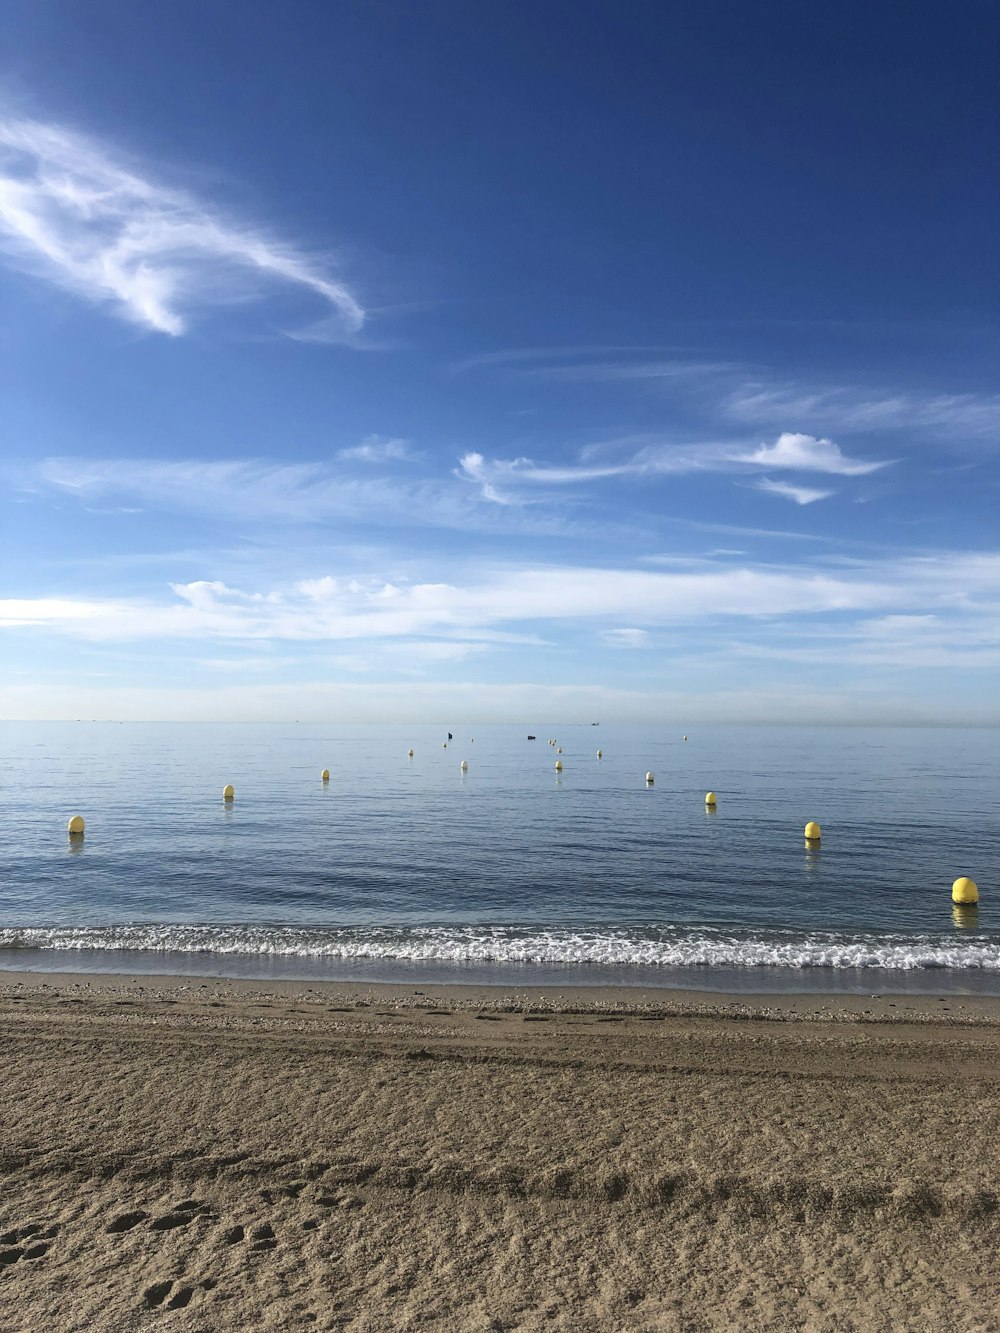 a beach with a bunch of yellow buoys in the water